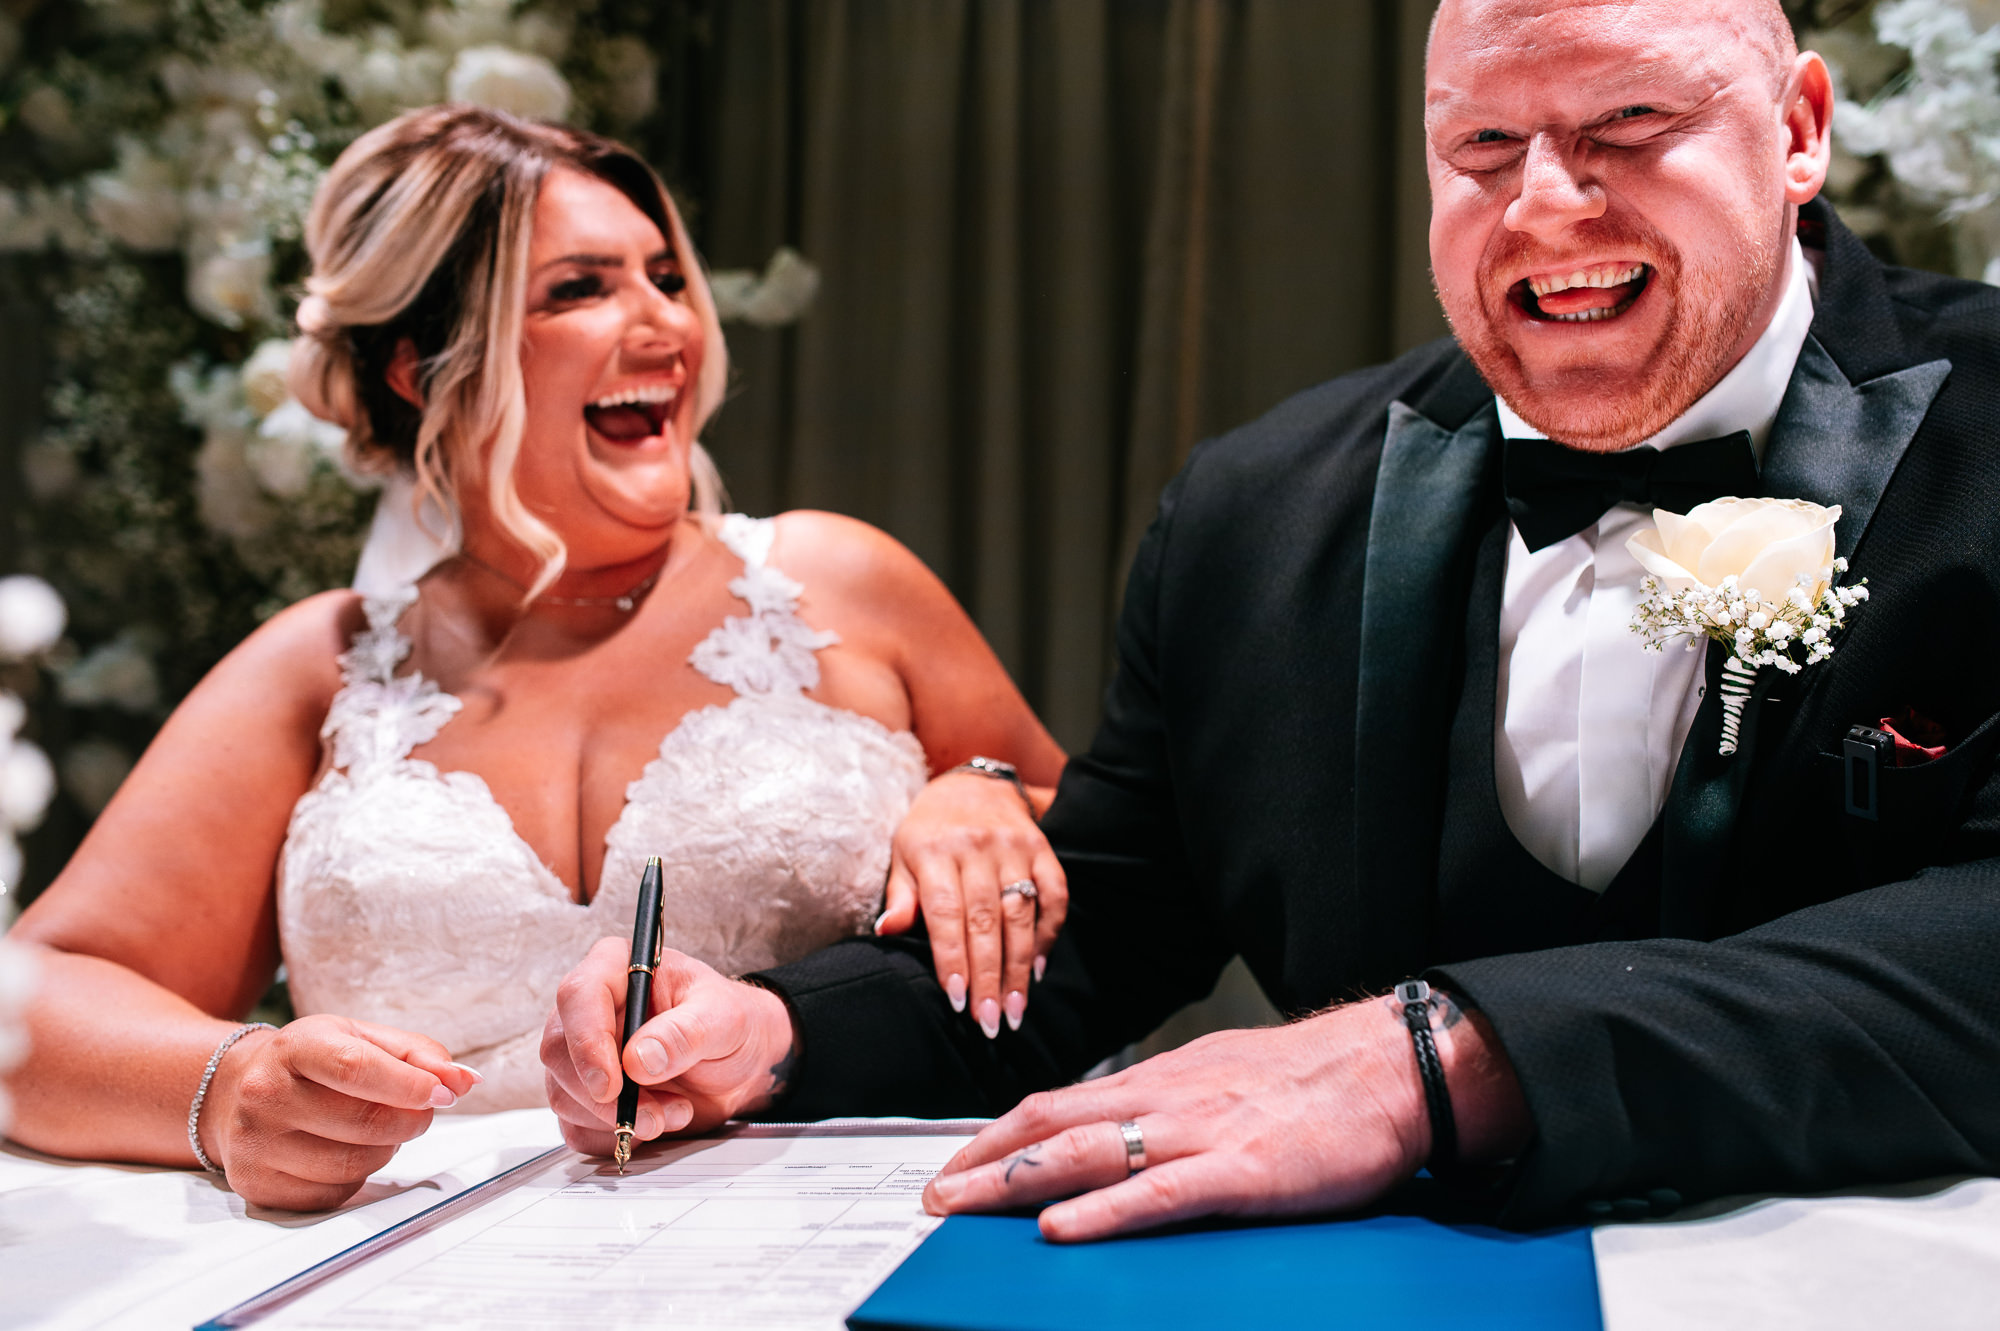 signing the marriage certificate together laughing